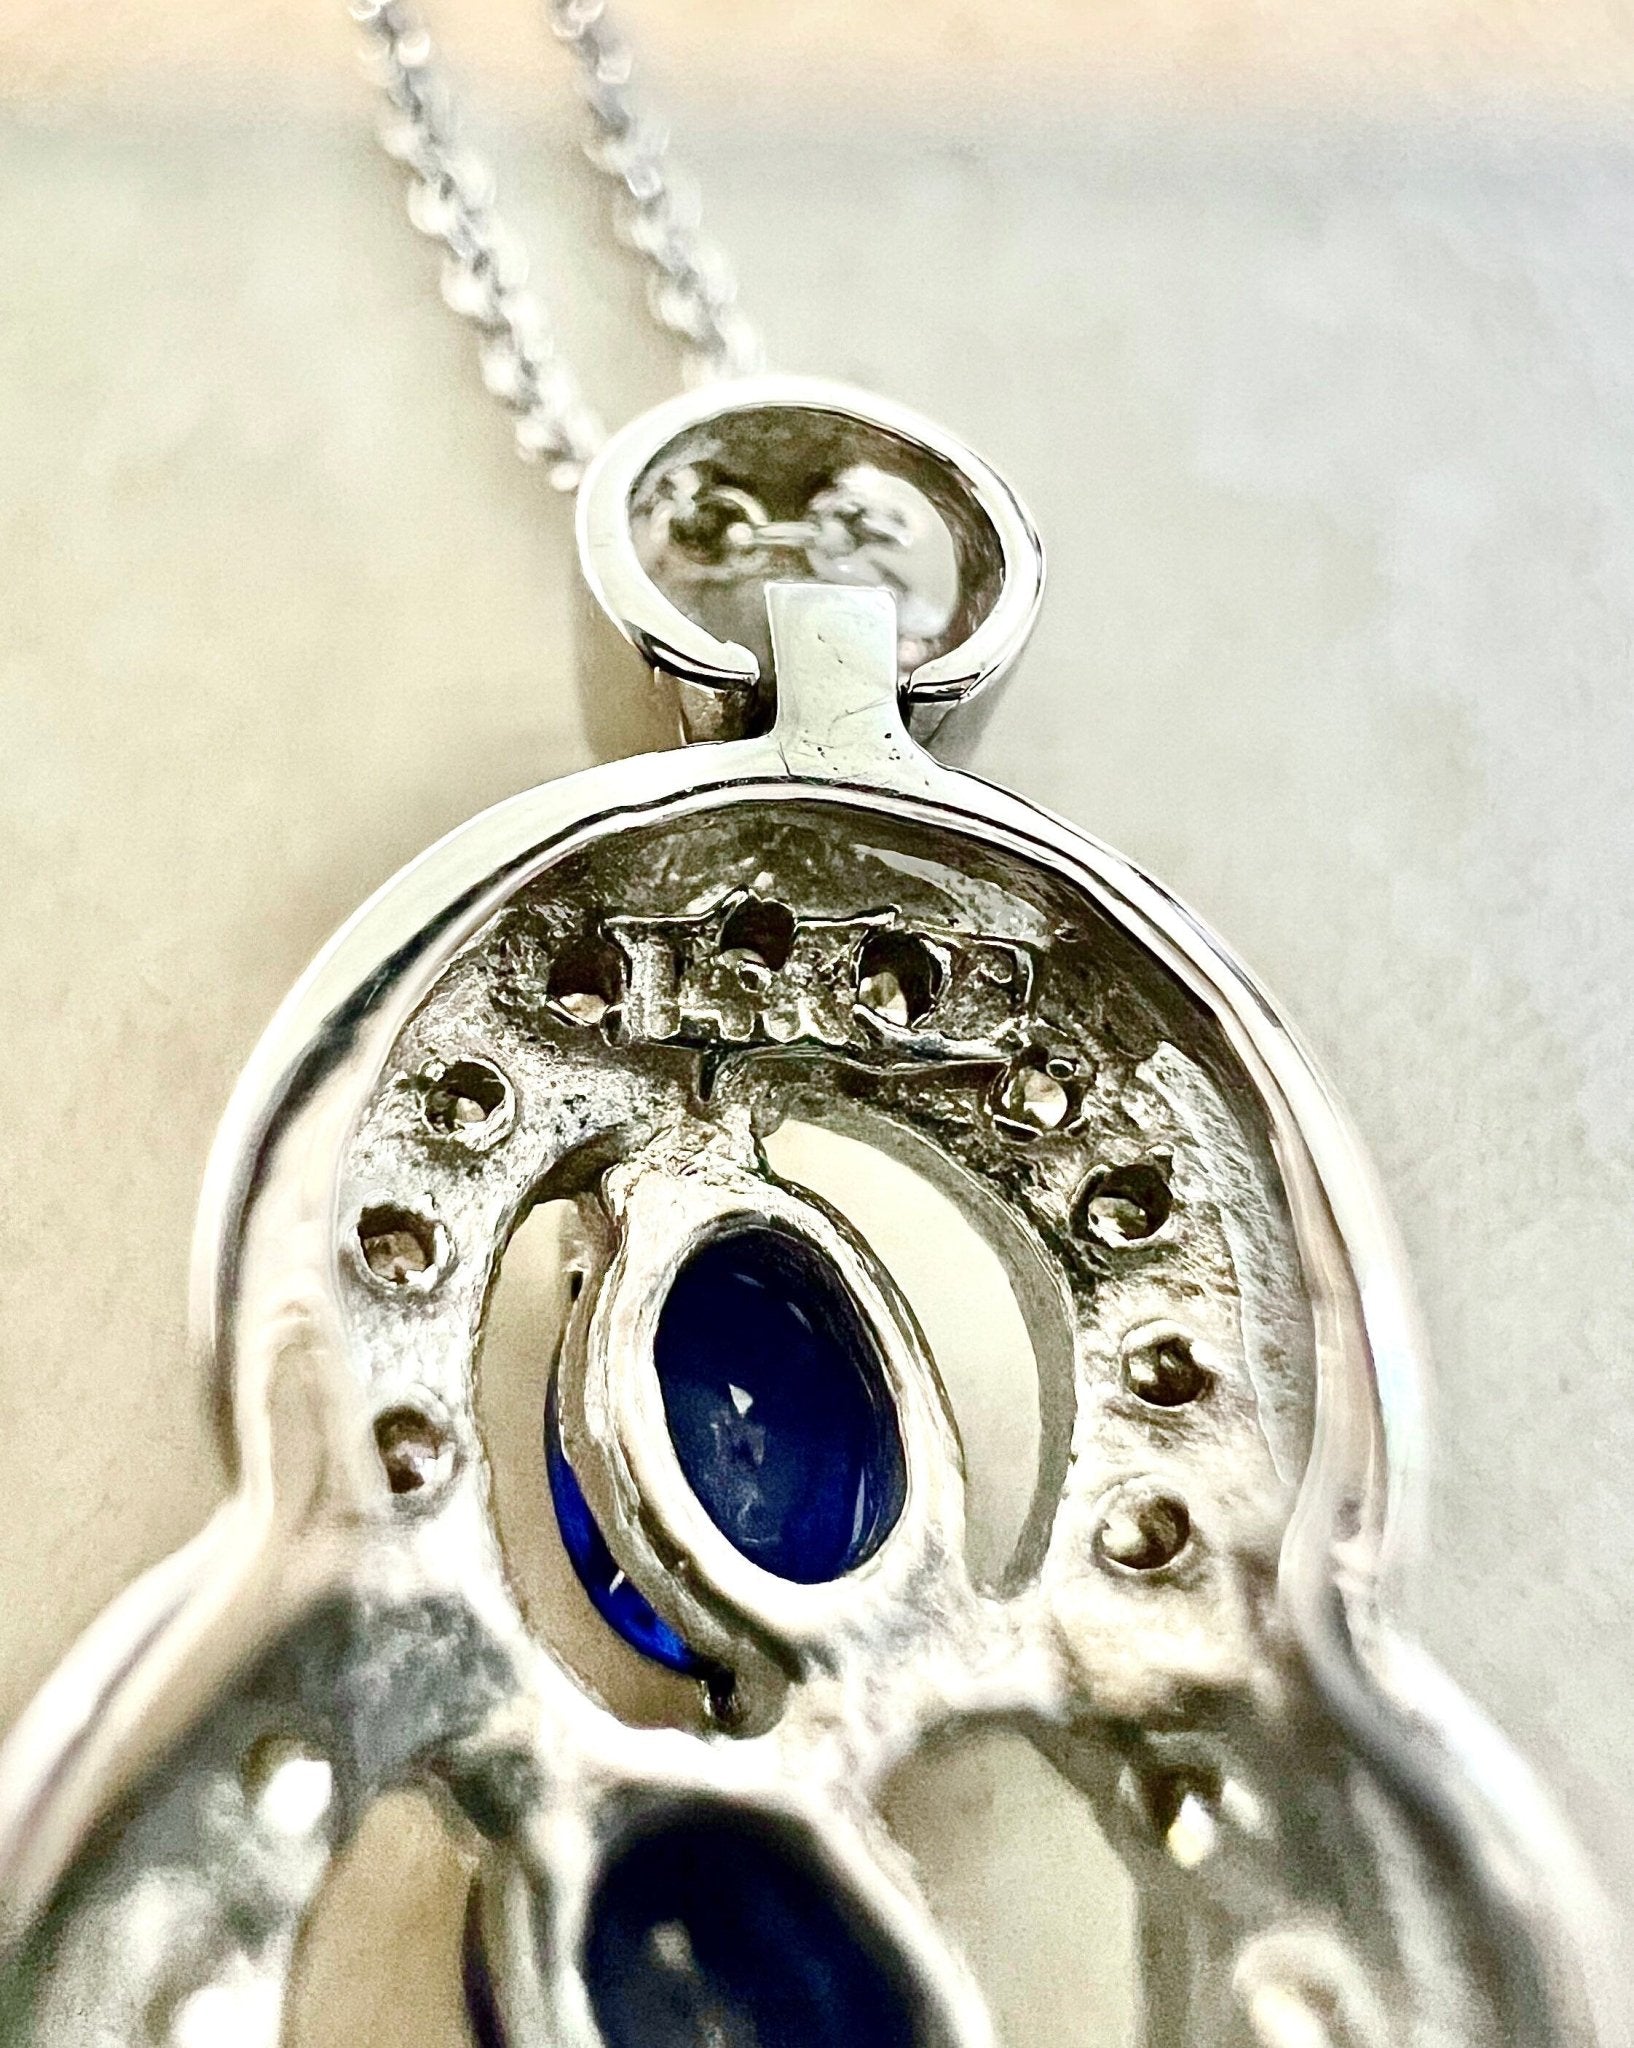 14K Halo Diamond & Sapphire 3 Stone Pendant Necklace - Halo Sapphire Necklace - April September Birthstone Necklace - Best Gifts For Her